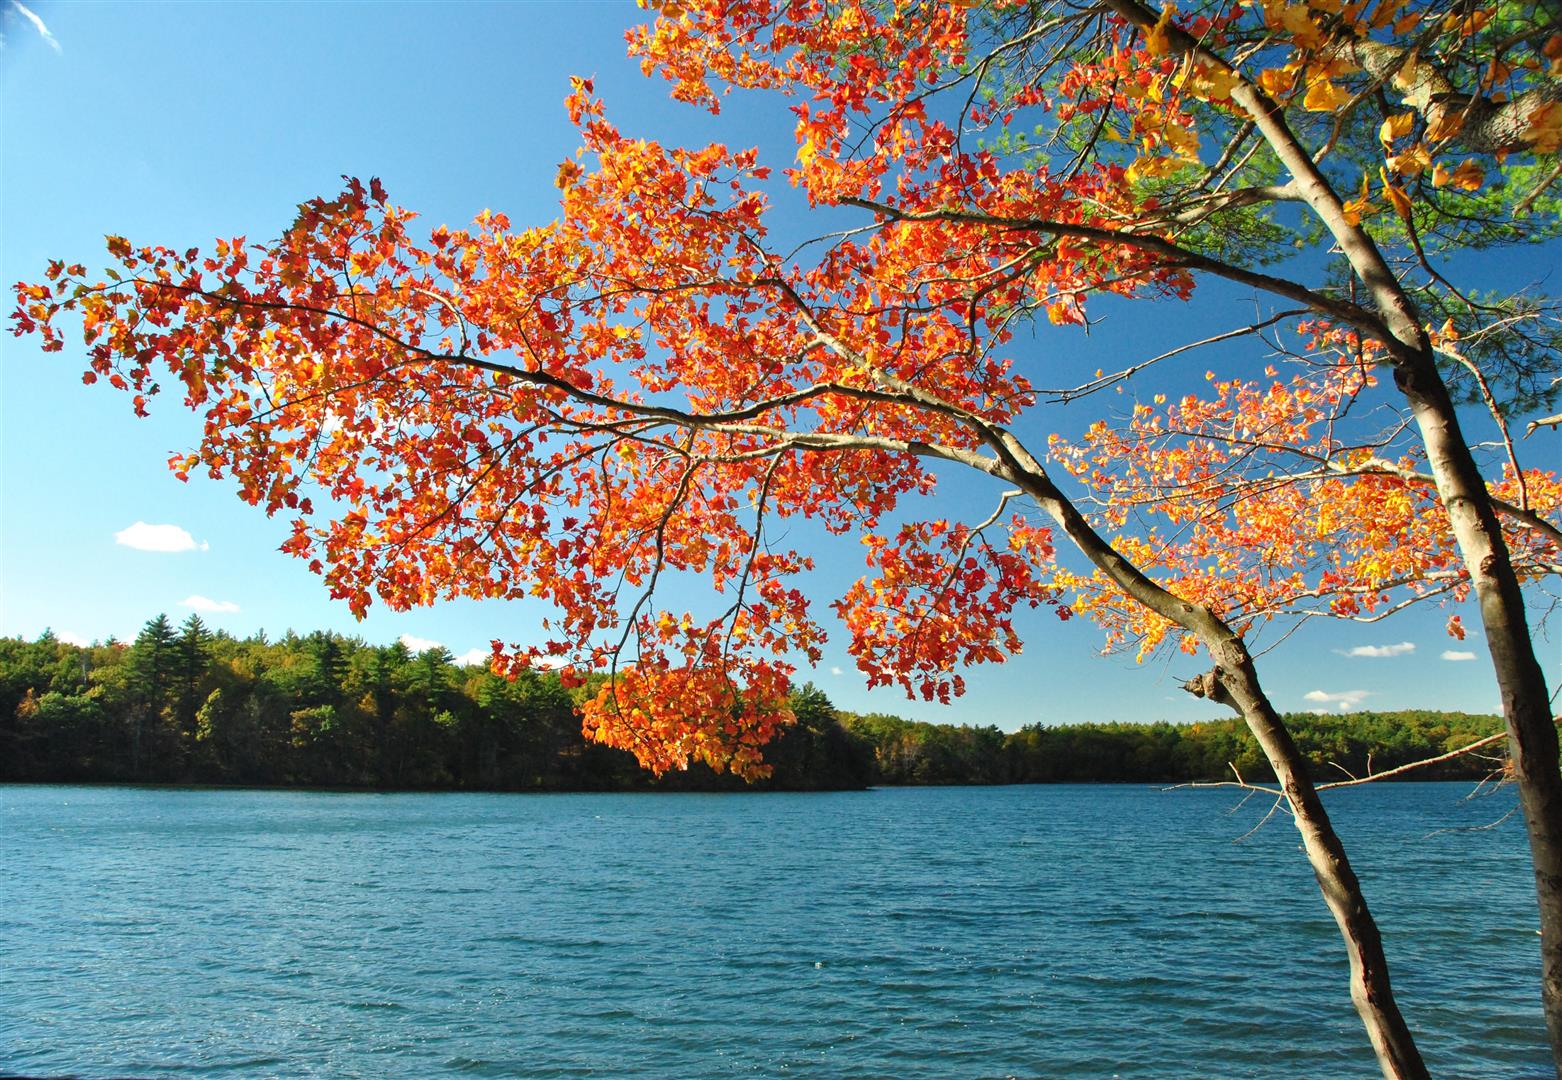 Fall is the perfect time to visit Walden Pond. The crowds have left and the leaves are turning. Photo by Angela N via Flickr.